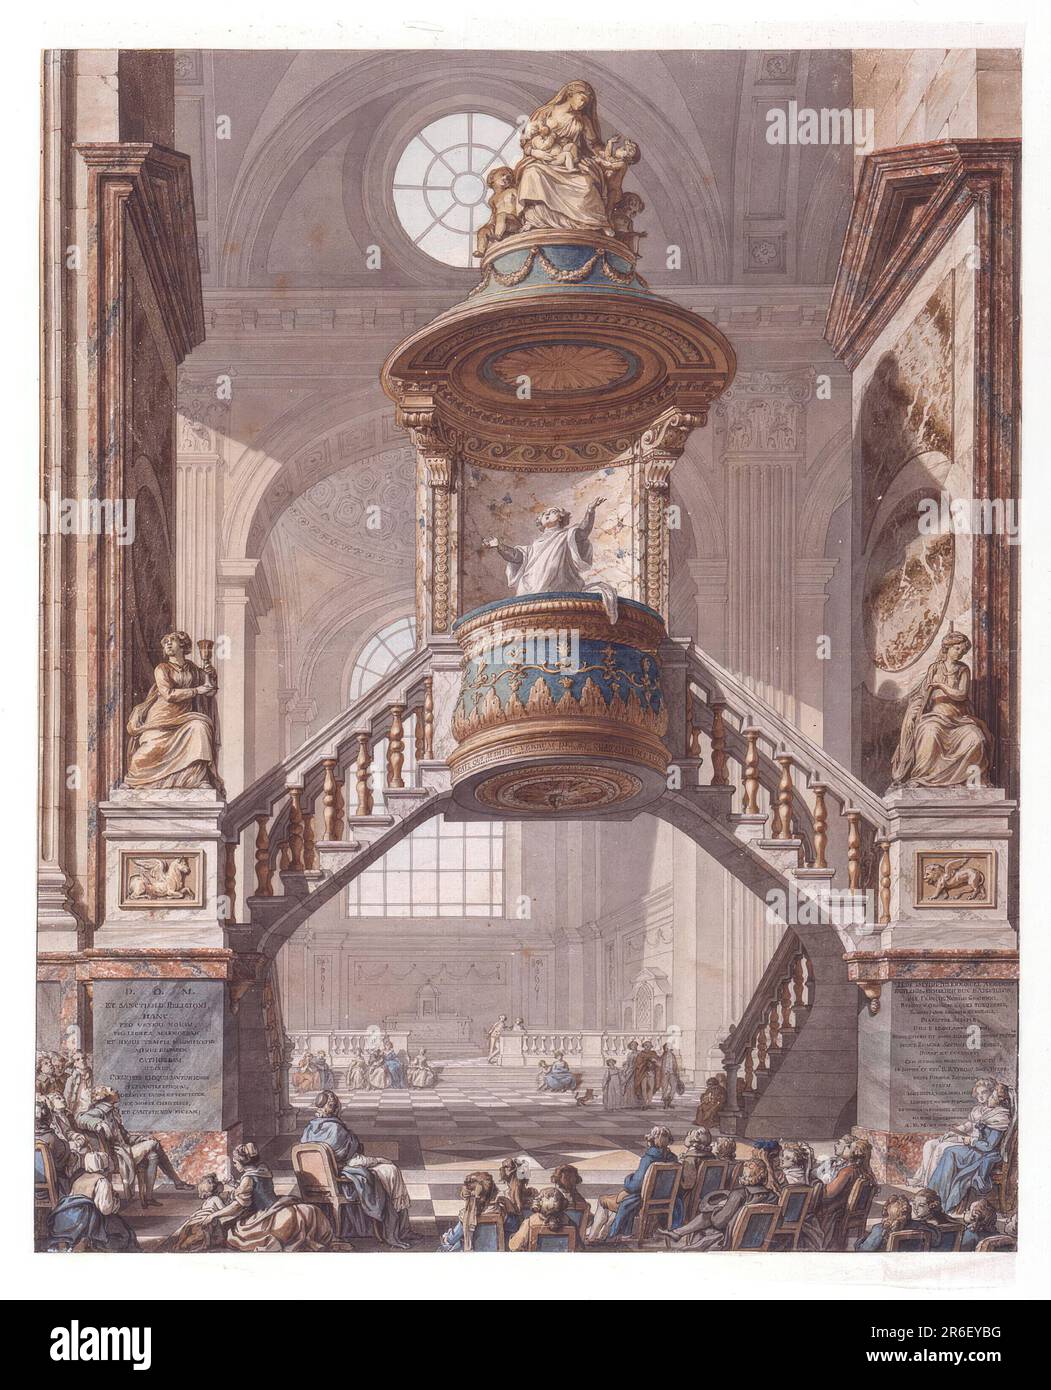 A marble pulpit dramatically suspended between two flights of stairs, designed by de Waily, forms a bridge-like structure across the nave of the Church of Saint Sulpice. A priest, with upraised arms, preaches to the congregation seated in the foreground. A sculpture of Charity adorns the top of the pulpit. A sculpture of Faith (holding a chalice) adorns the left landing; the pedestal shows a bas-relief of the symbol of St. Luke (ox). On the right landing, a sculpture of Hope (holding an anchor) rests on a pedestal decorated with a bas relief of St. Mark's symbol (the lion). Pen and black ink, Stock Photo